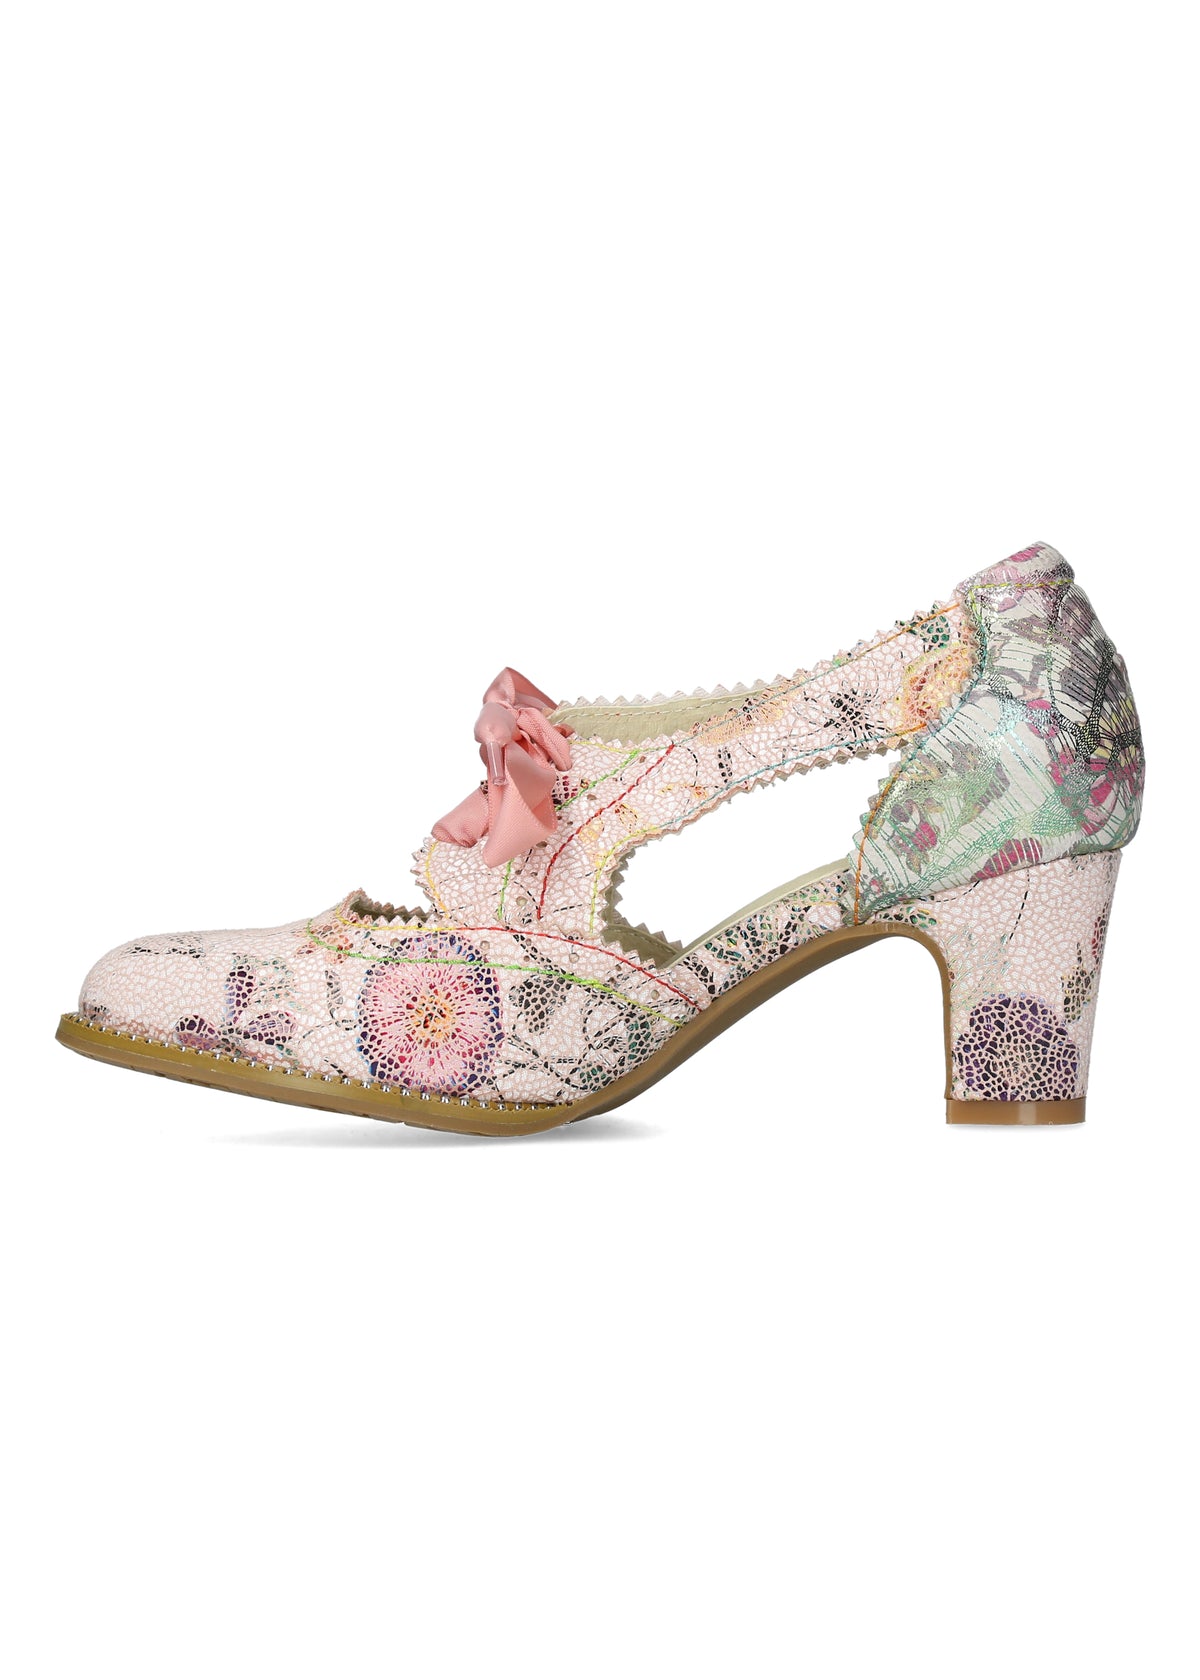 Bow ankle boots - Elcodieo 0422, powder-tone leather, floral patterns